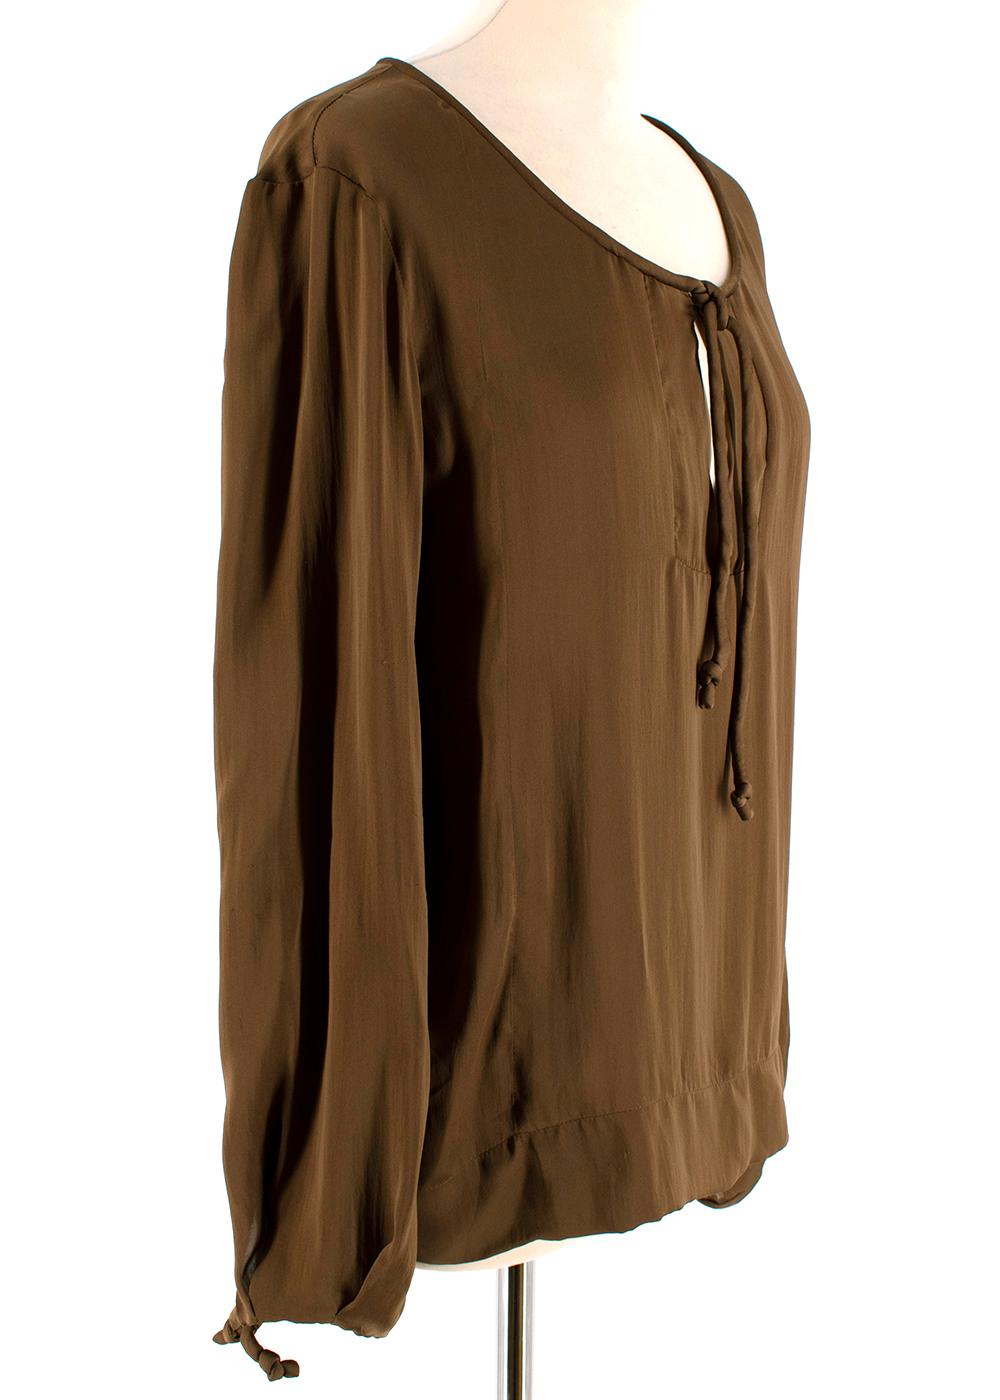 Tom Ford Brown Silk Blouse 

- Tie at neck & sleeves 
- Pleat on back of neck
- Loose Fit 

Materials:
- 100% Silk

Dry Clean only 

Made in Italy 

Measurements are taken laying flat, seam to seam. 

Shoulders - 10cm
Sleeves - 55cm
Chest -